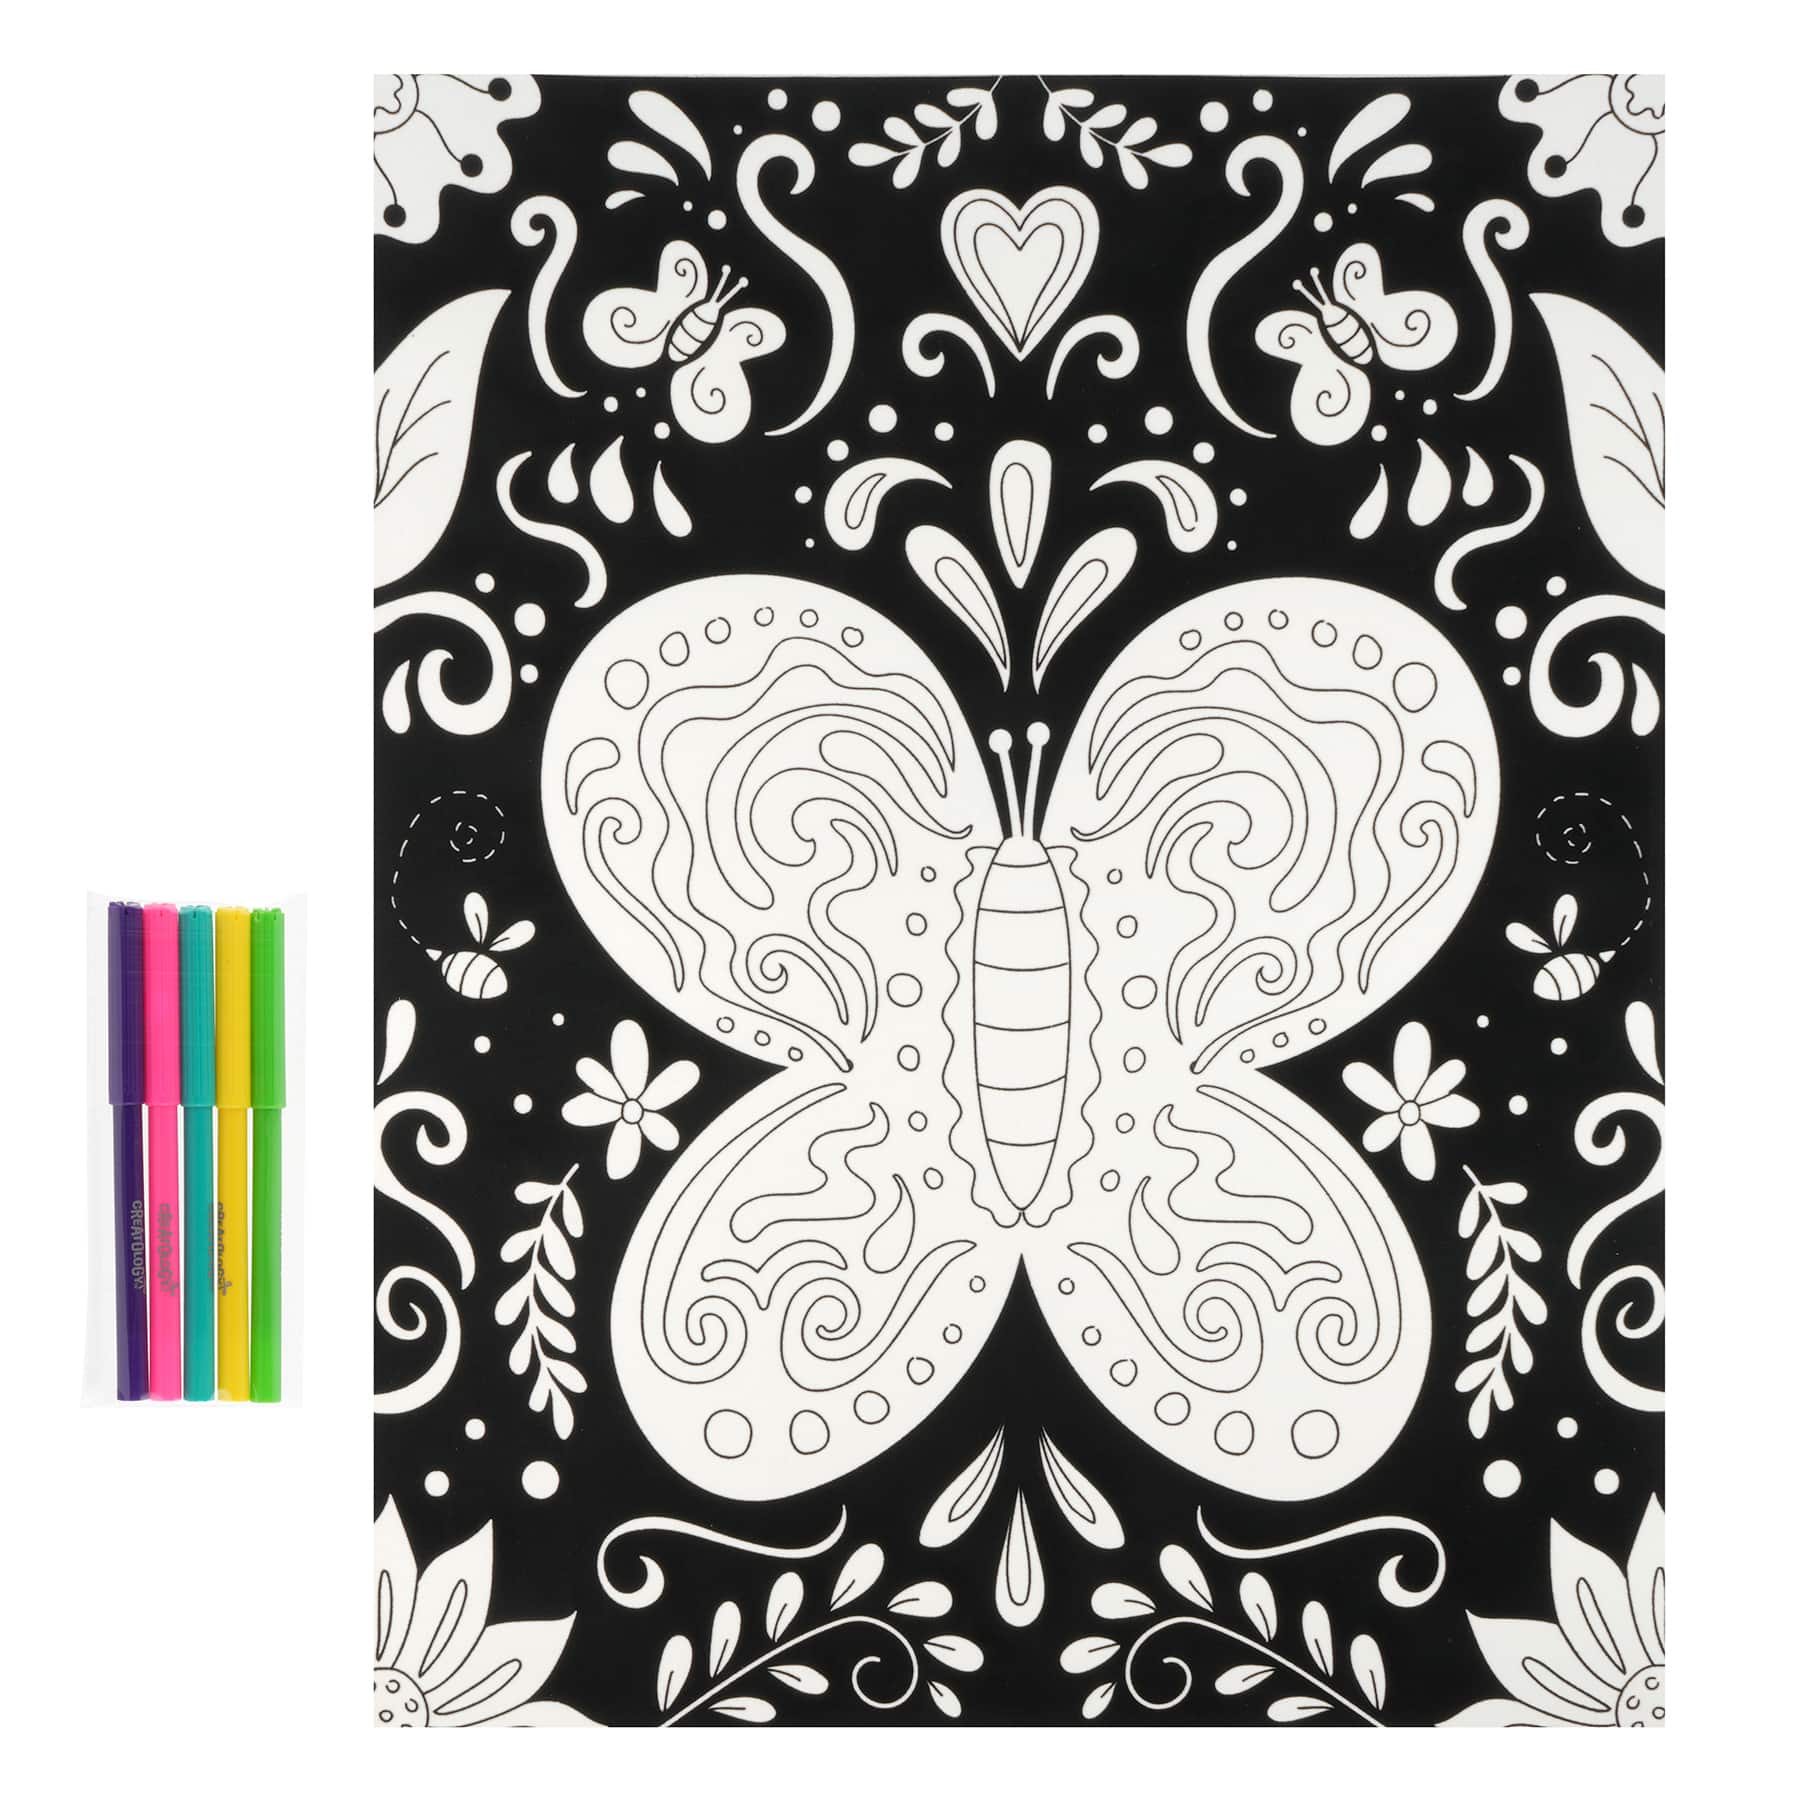 Tangles - 6 Pack of 8x10 inch Fuzzy Velvet Coloring Posters